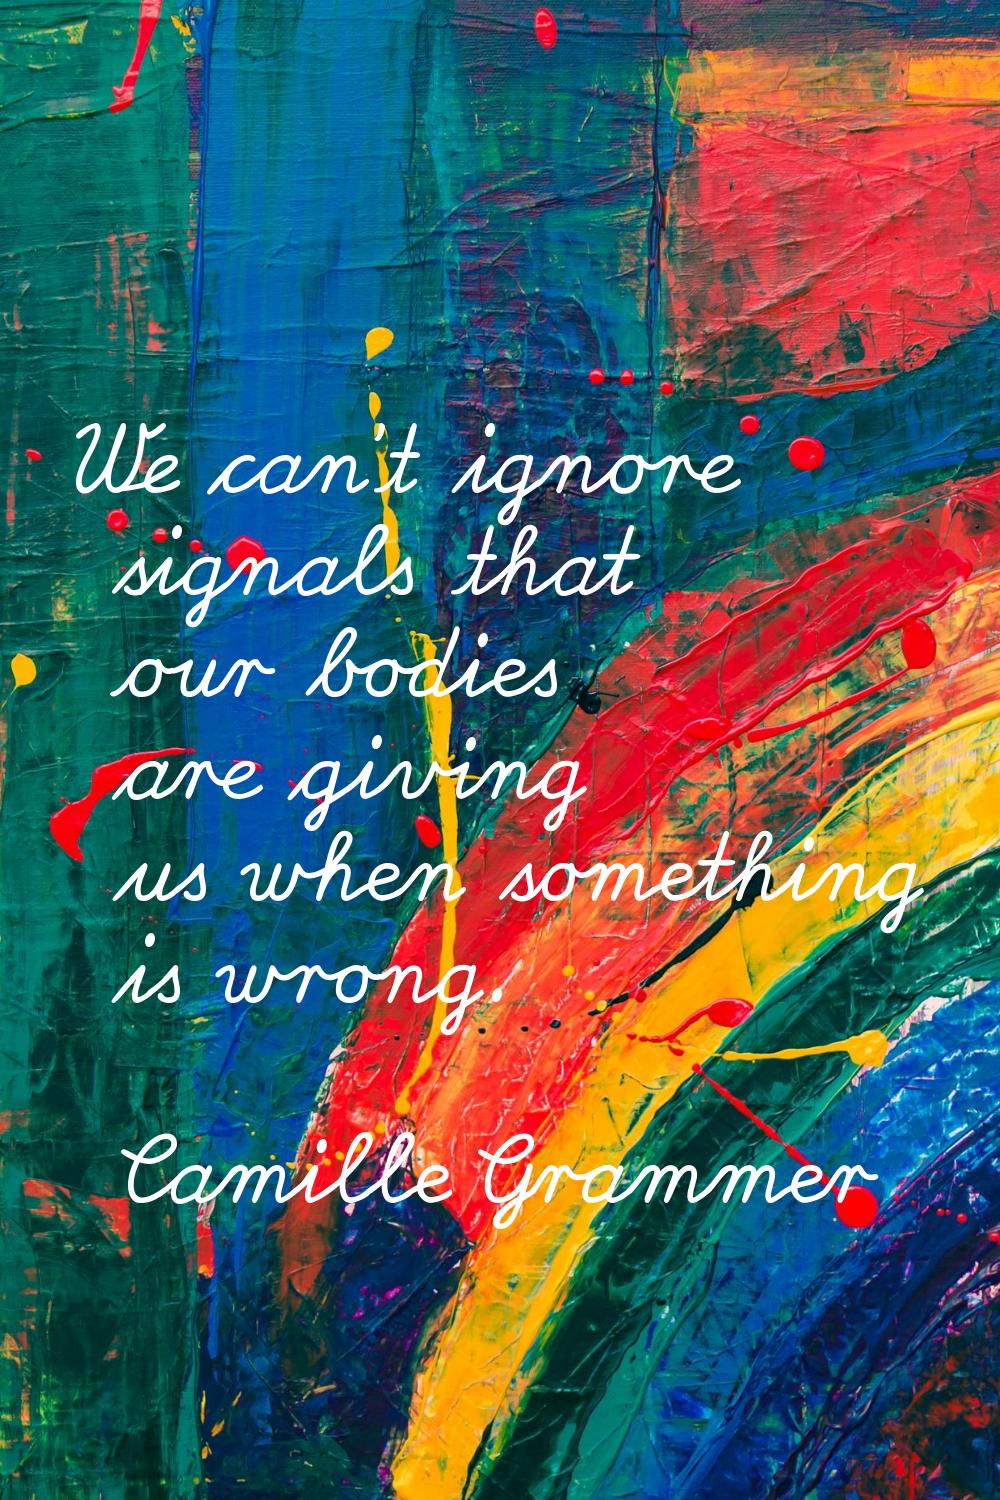 We can't ignore signals that our bodies are giving us when something is wrong.